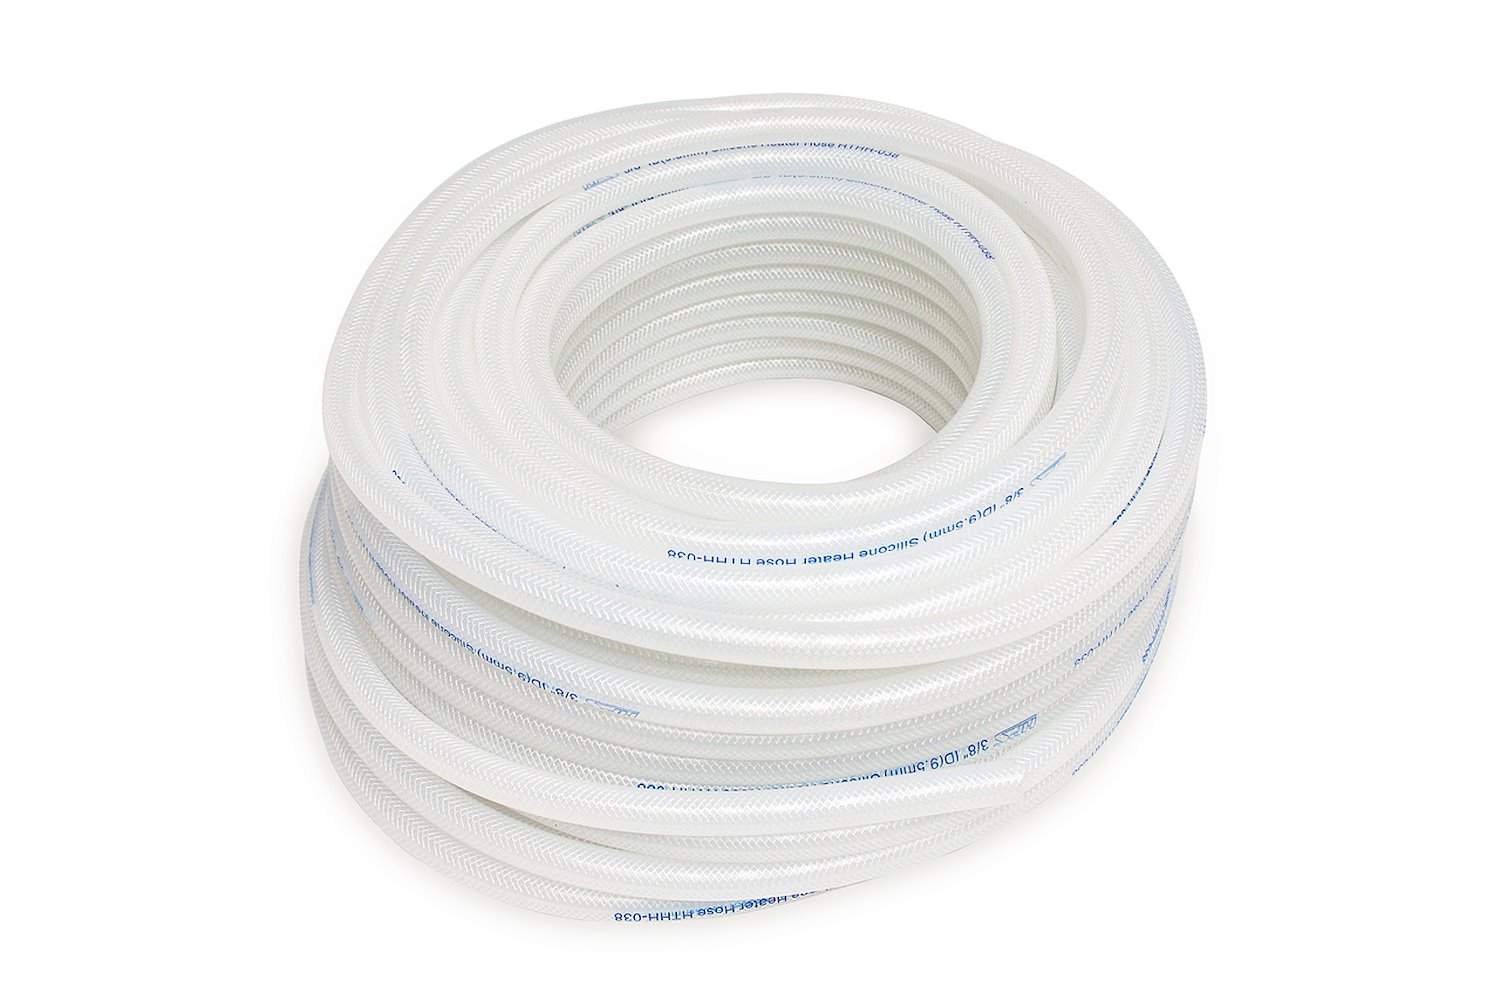 HTHH-025-CLEARx25 Silicone Heater Hose Tubing, High-Temp Reinforced, 1/4 in. ID, 25 ft. Roll, Clear